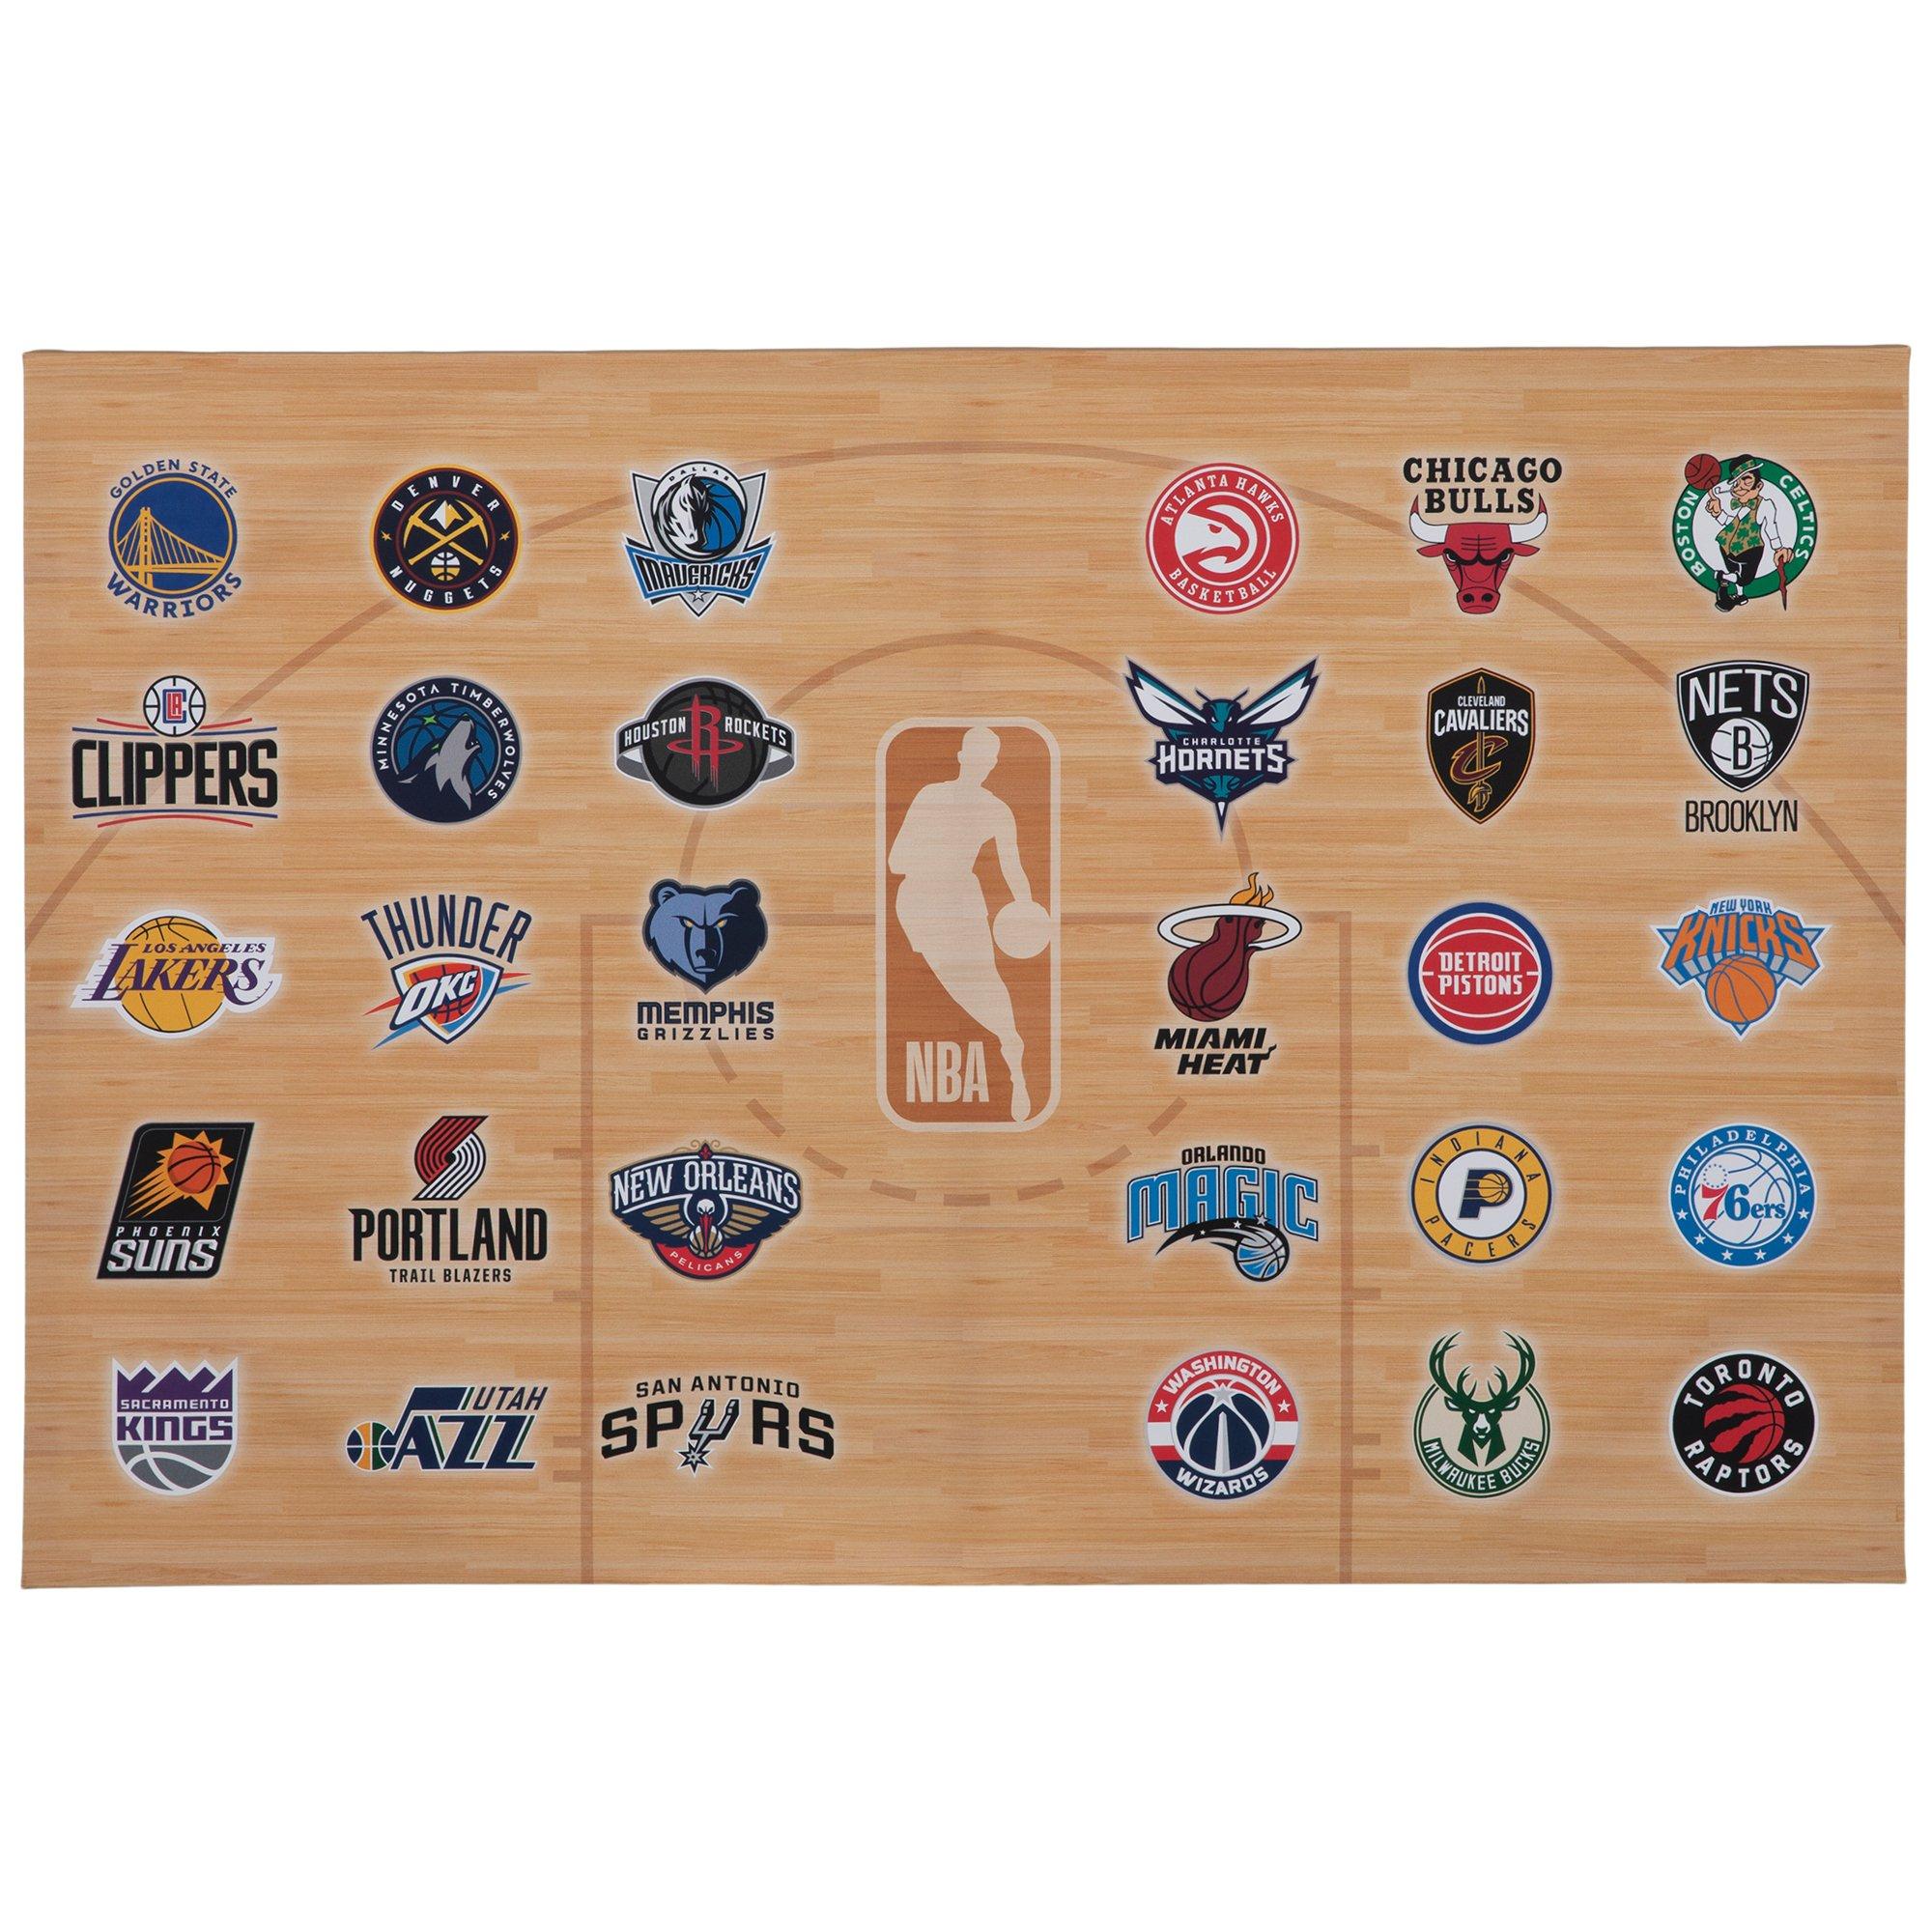 NBA Banners your NBA Banners and NBA Decorations source